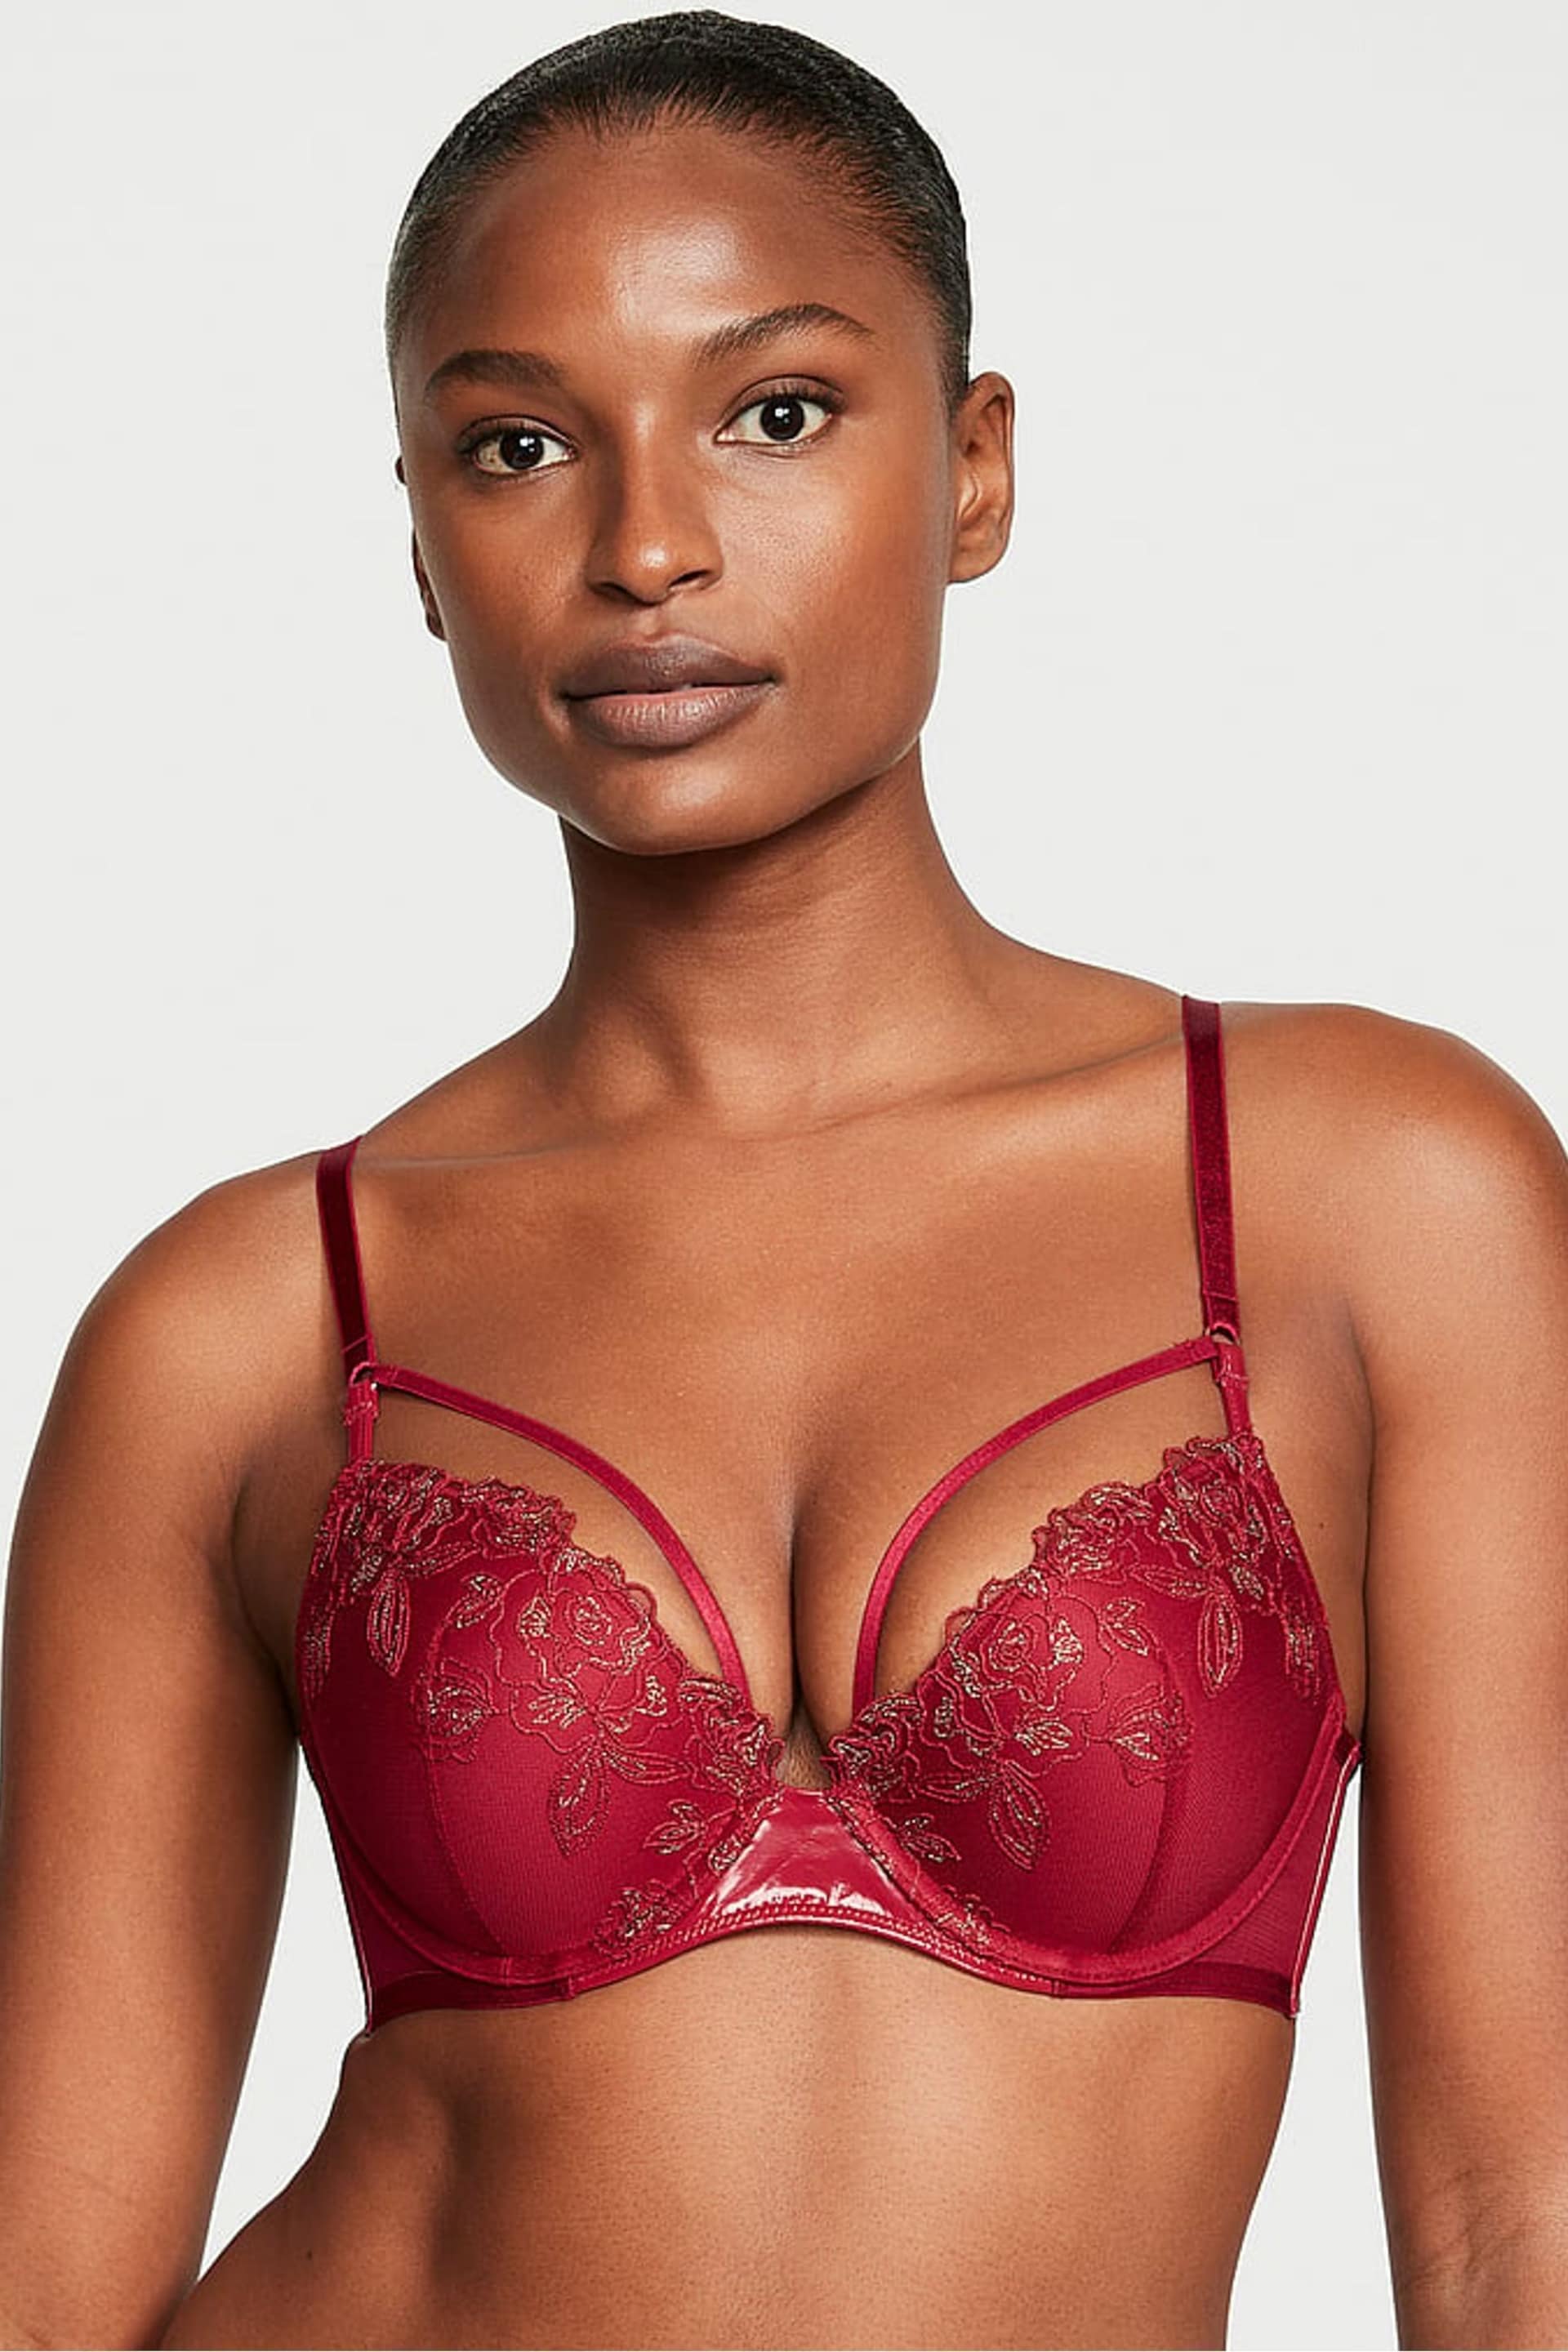 Victoria's Secret Red Lacquer Push Up Bra - Image 1 of 3